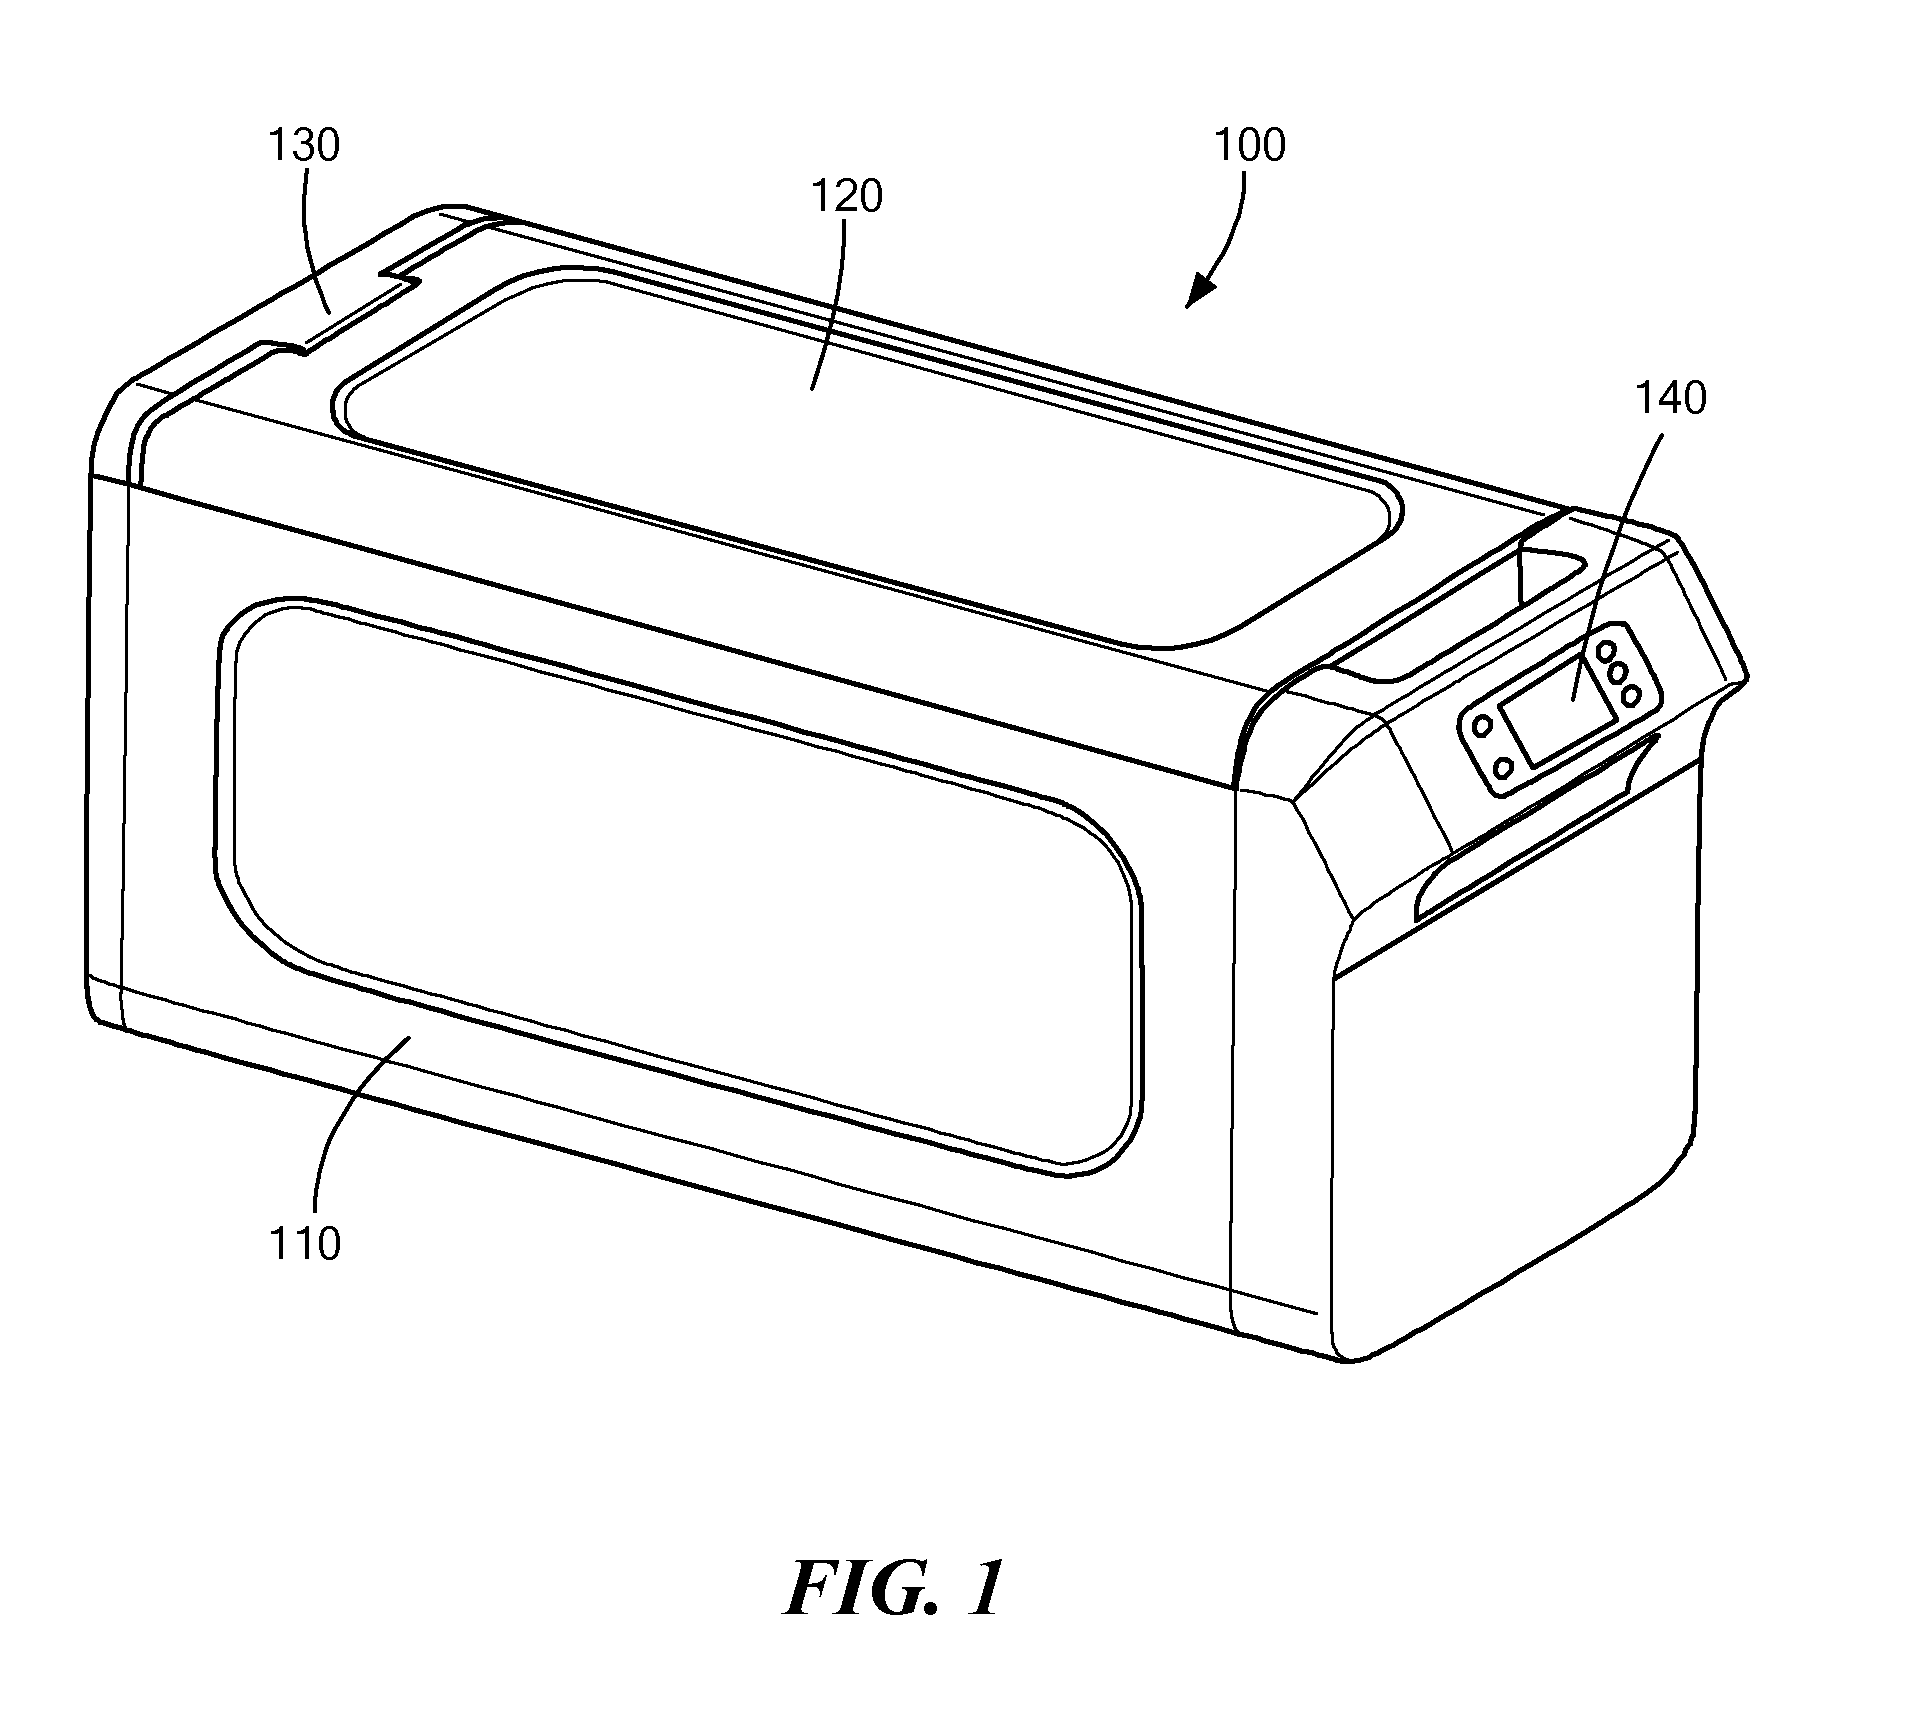 System and Method For Active Cooling of Stored Blood Products